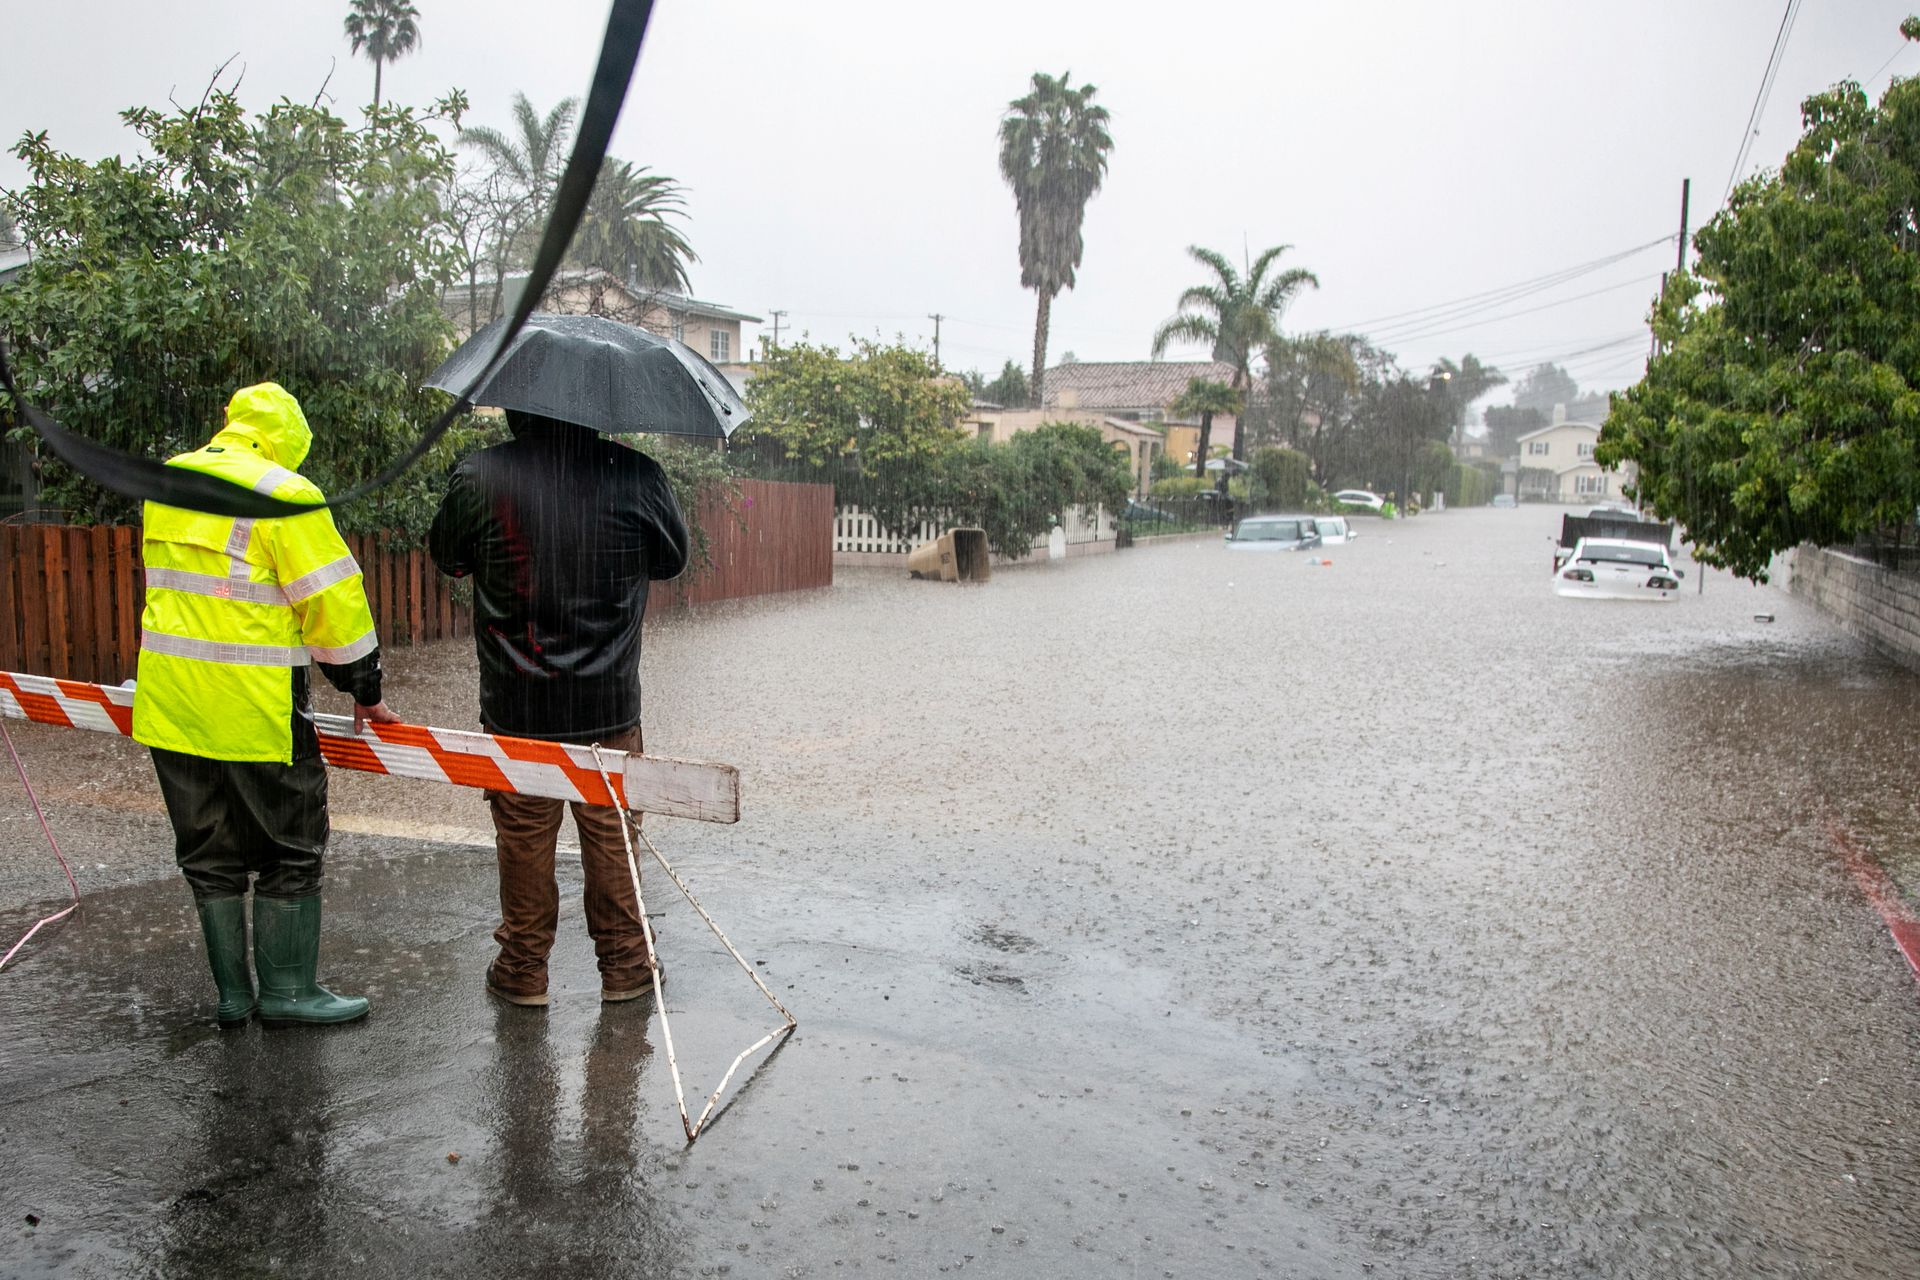 Residents look at abandoned cars on a flooded street in east Santa Barbara, California, U.S. 9 January 2023. Photo: Erica Urech / REUTERS